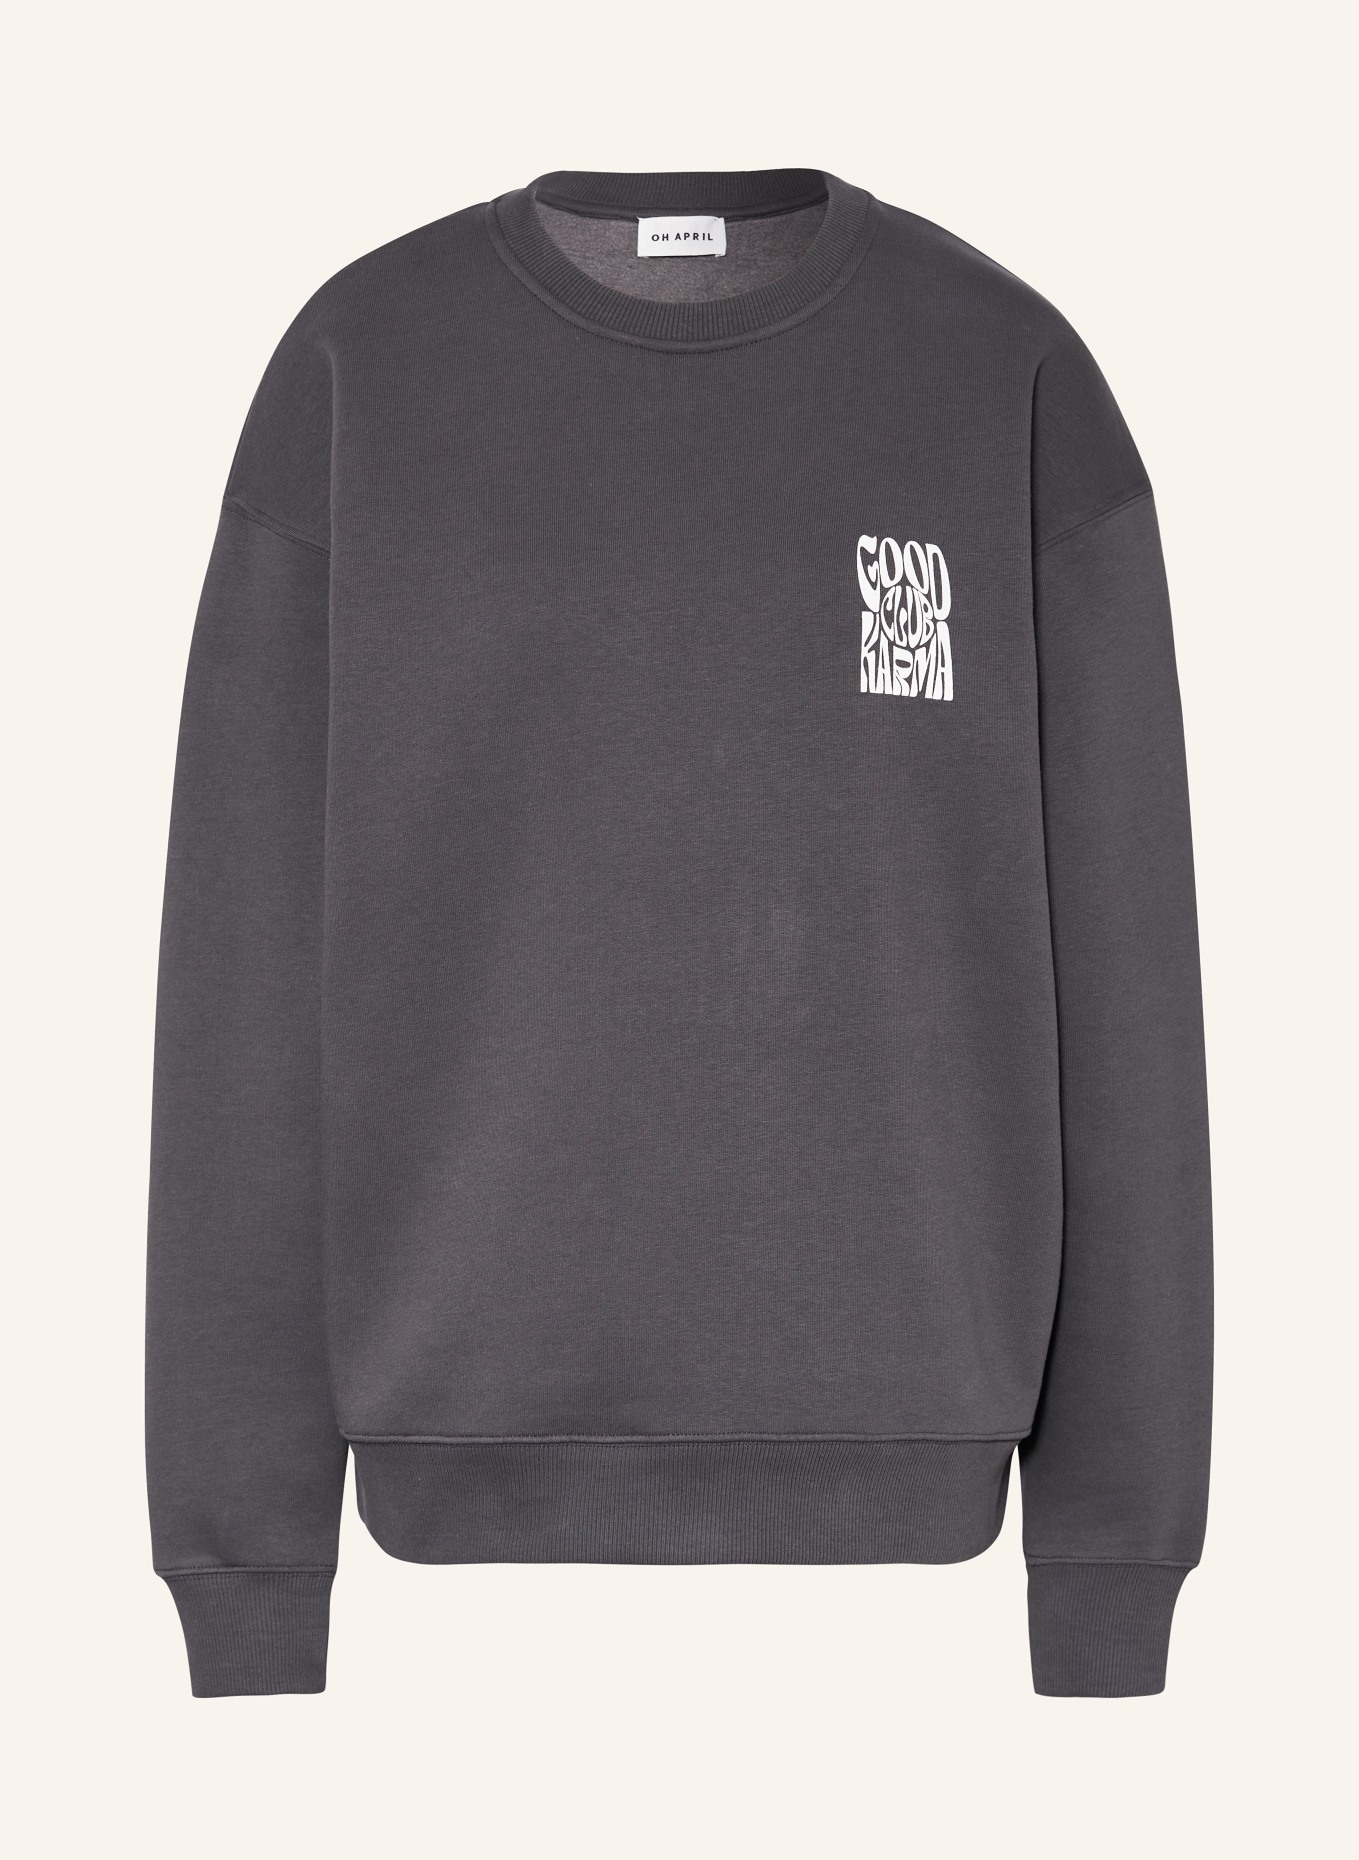 OH APRIL Oversized sweatshirt, Color: GRAY/ WHITE (Image 1)